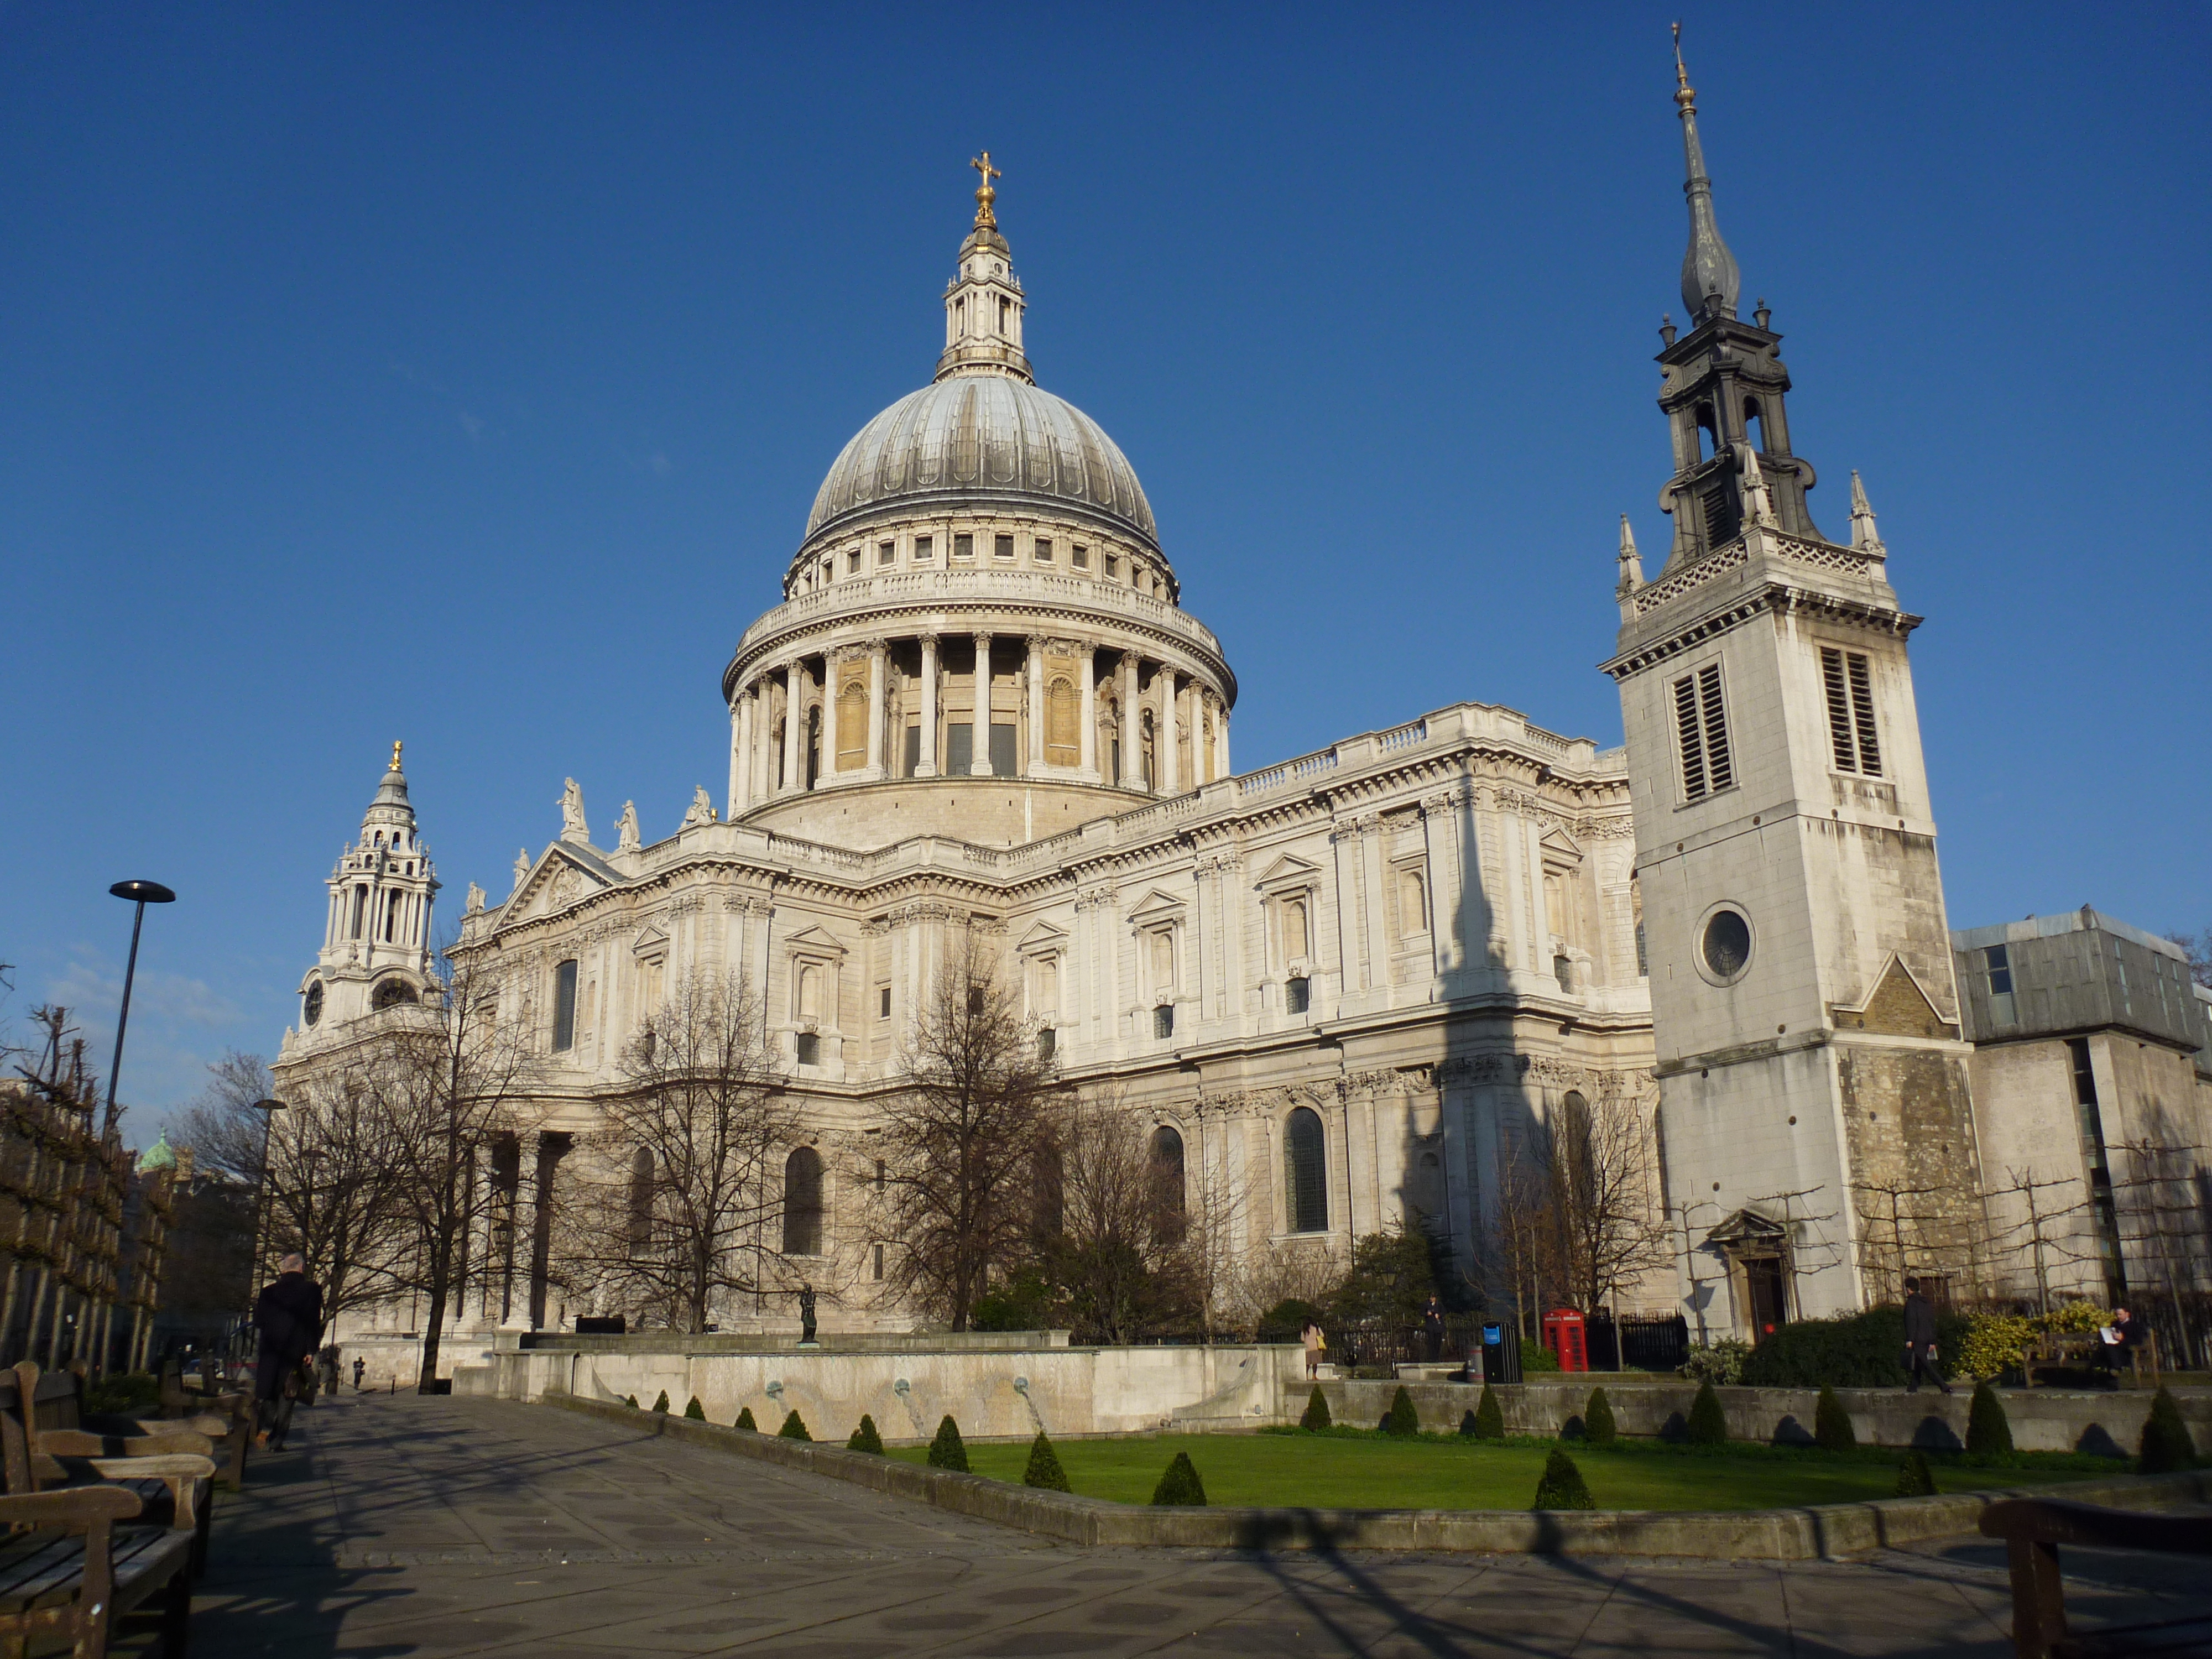 Images of St. Paul's Cathedral | 4000x3000